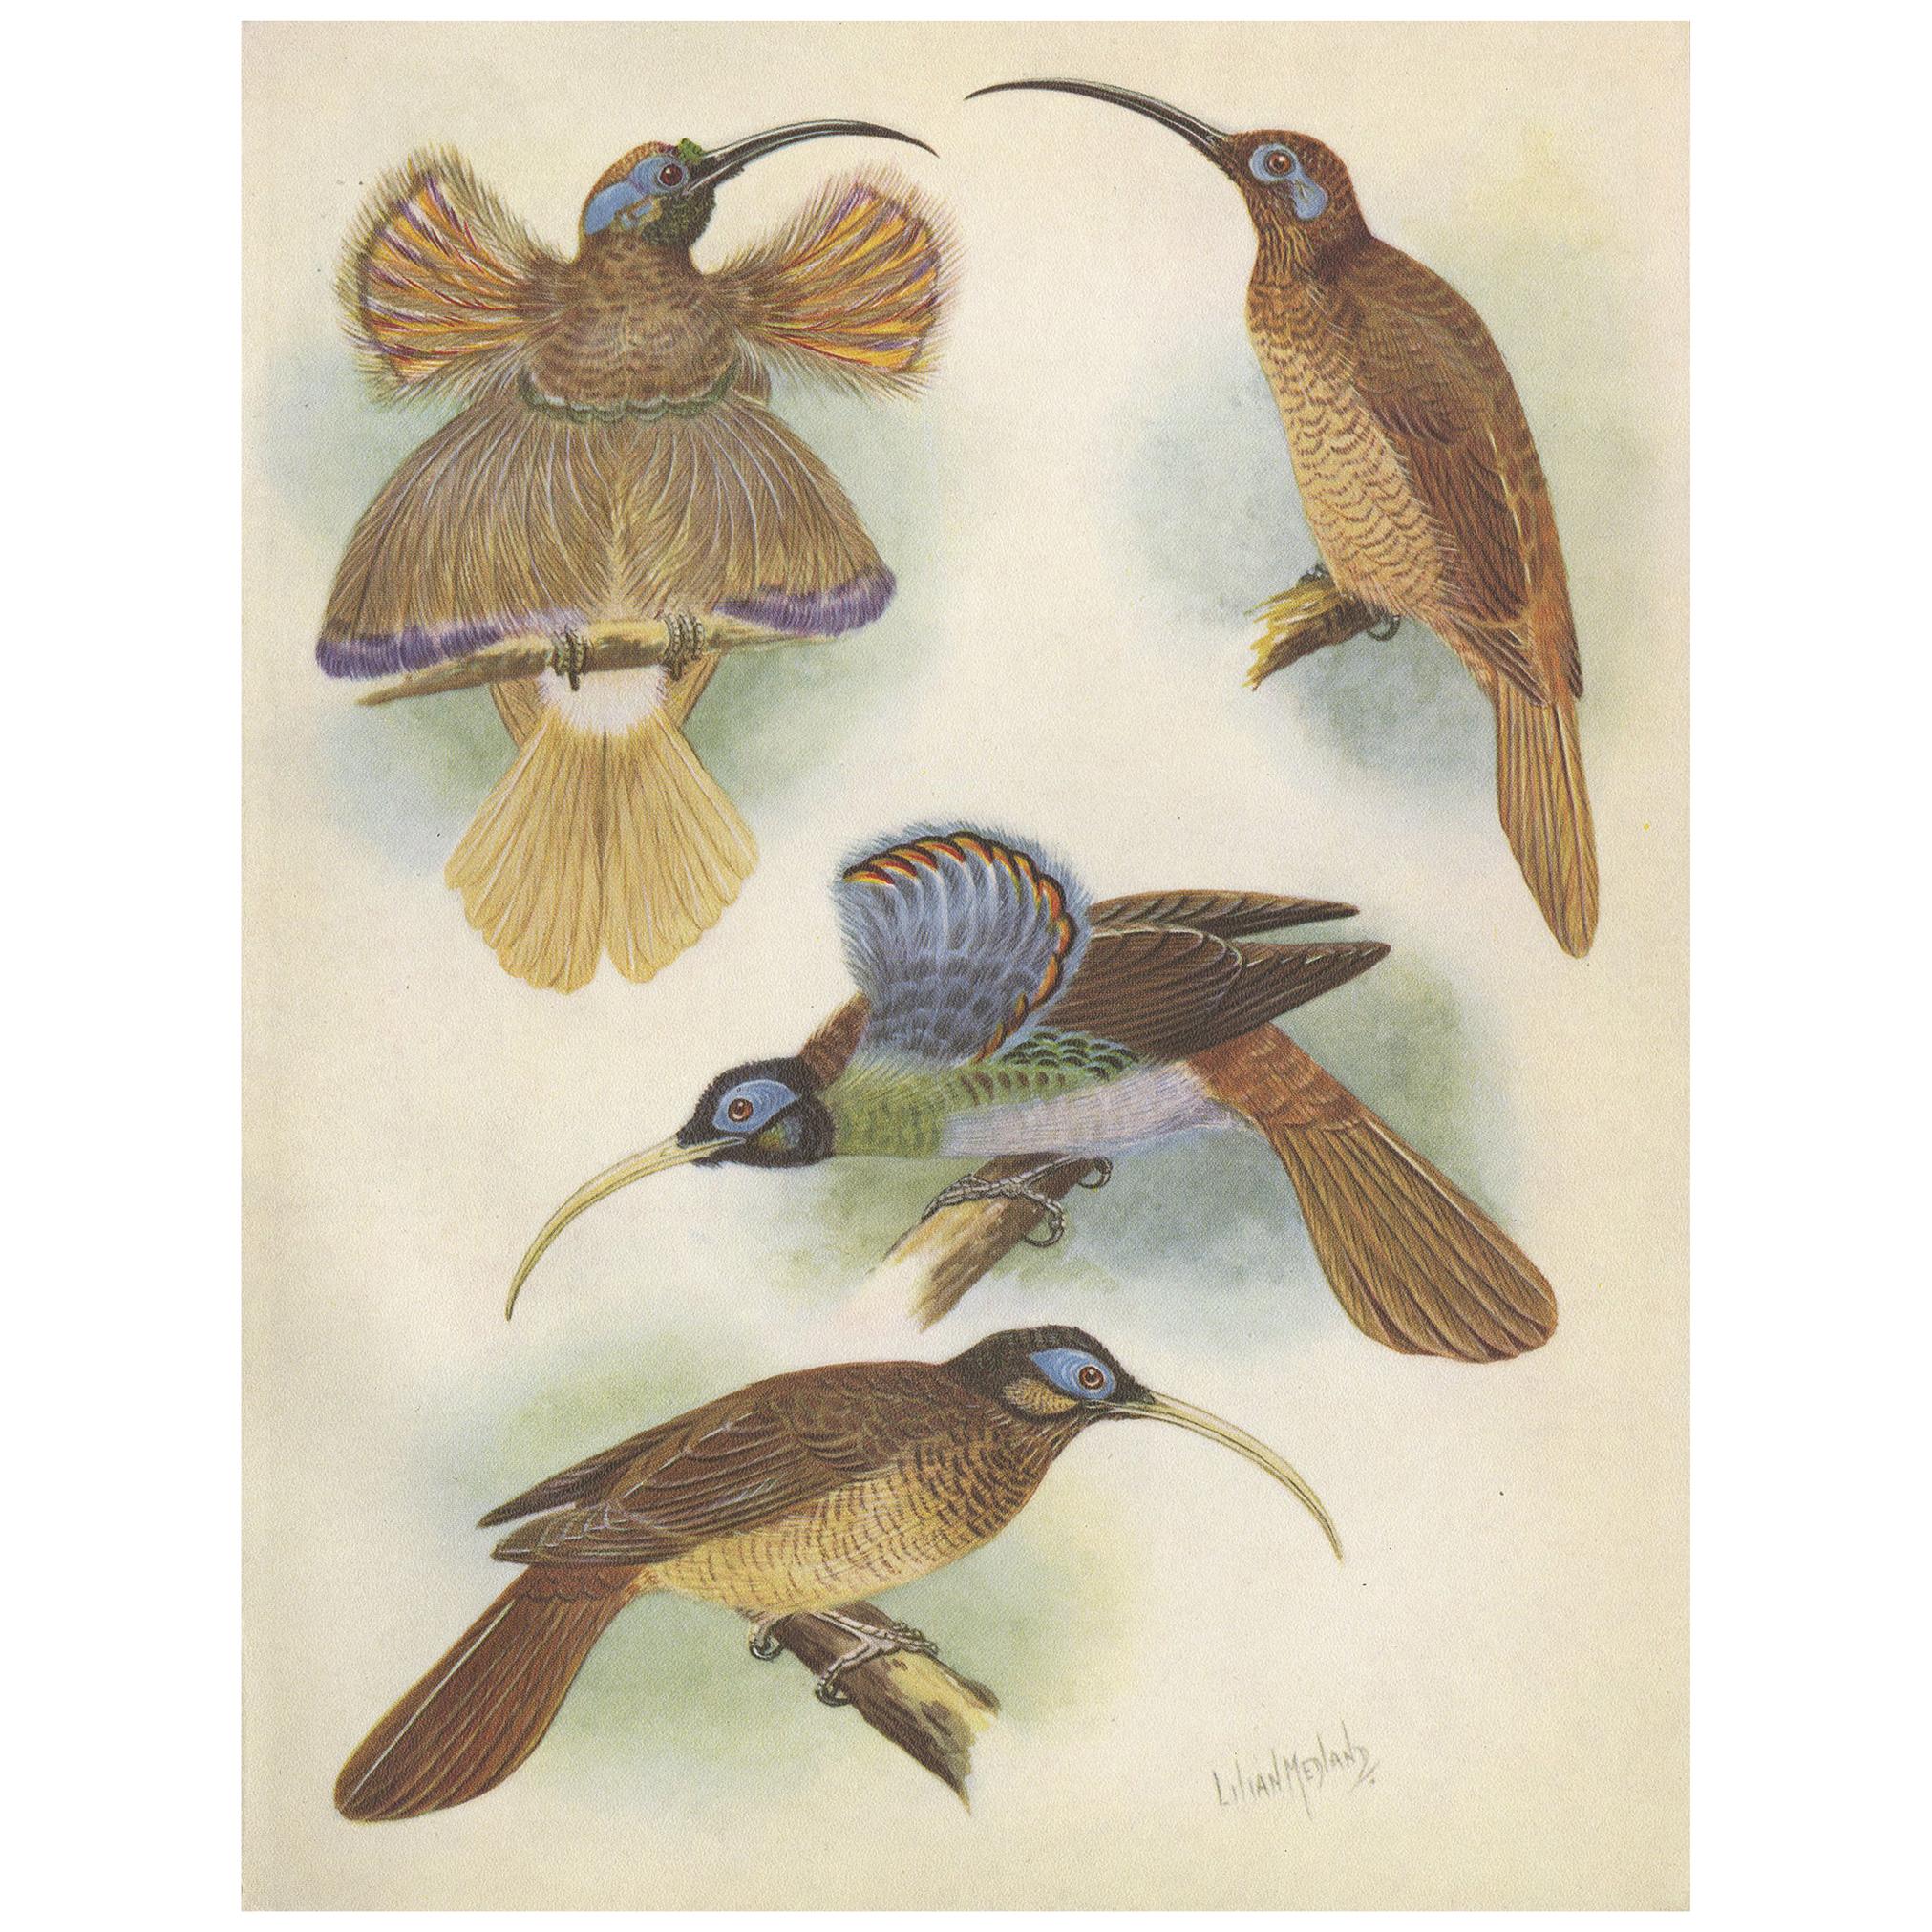 Antique Print of the Red Sickle Billand and the White-Billed Sickle Bill, 1950